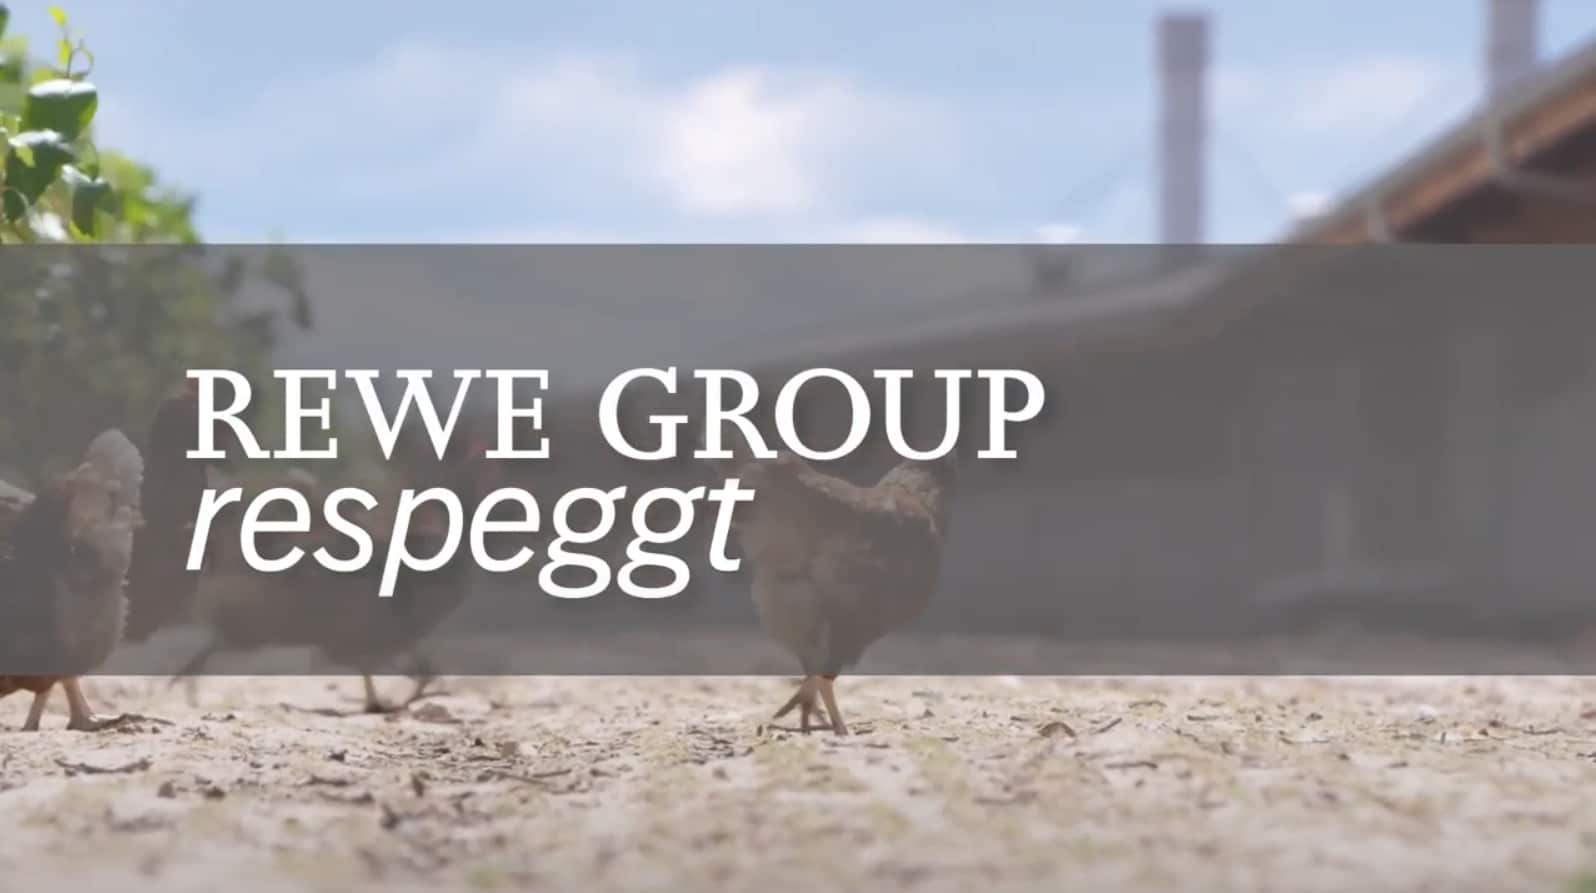 REWE Group respeggt